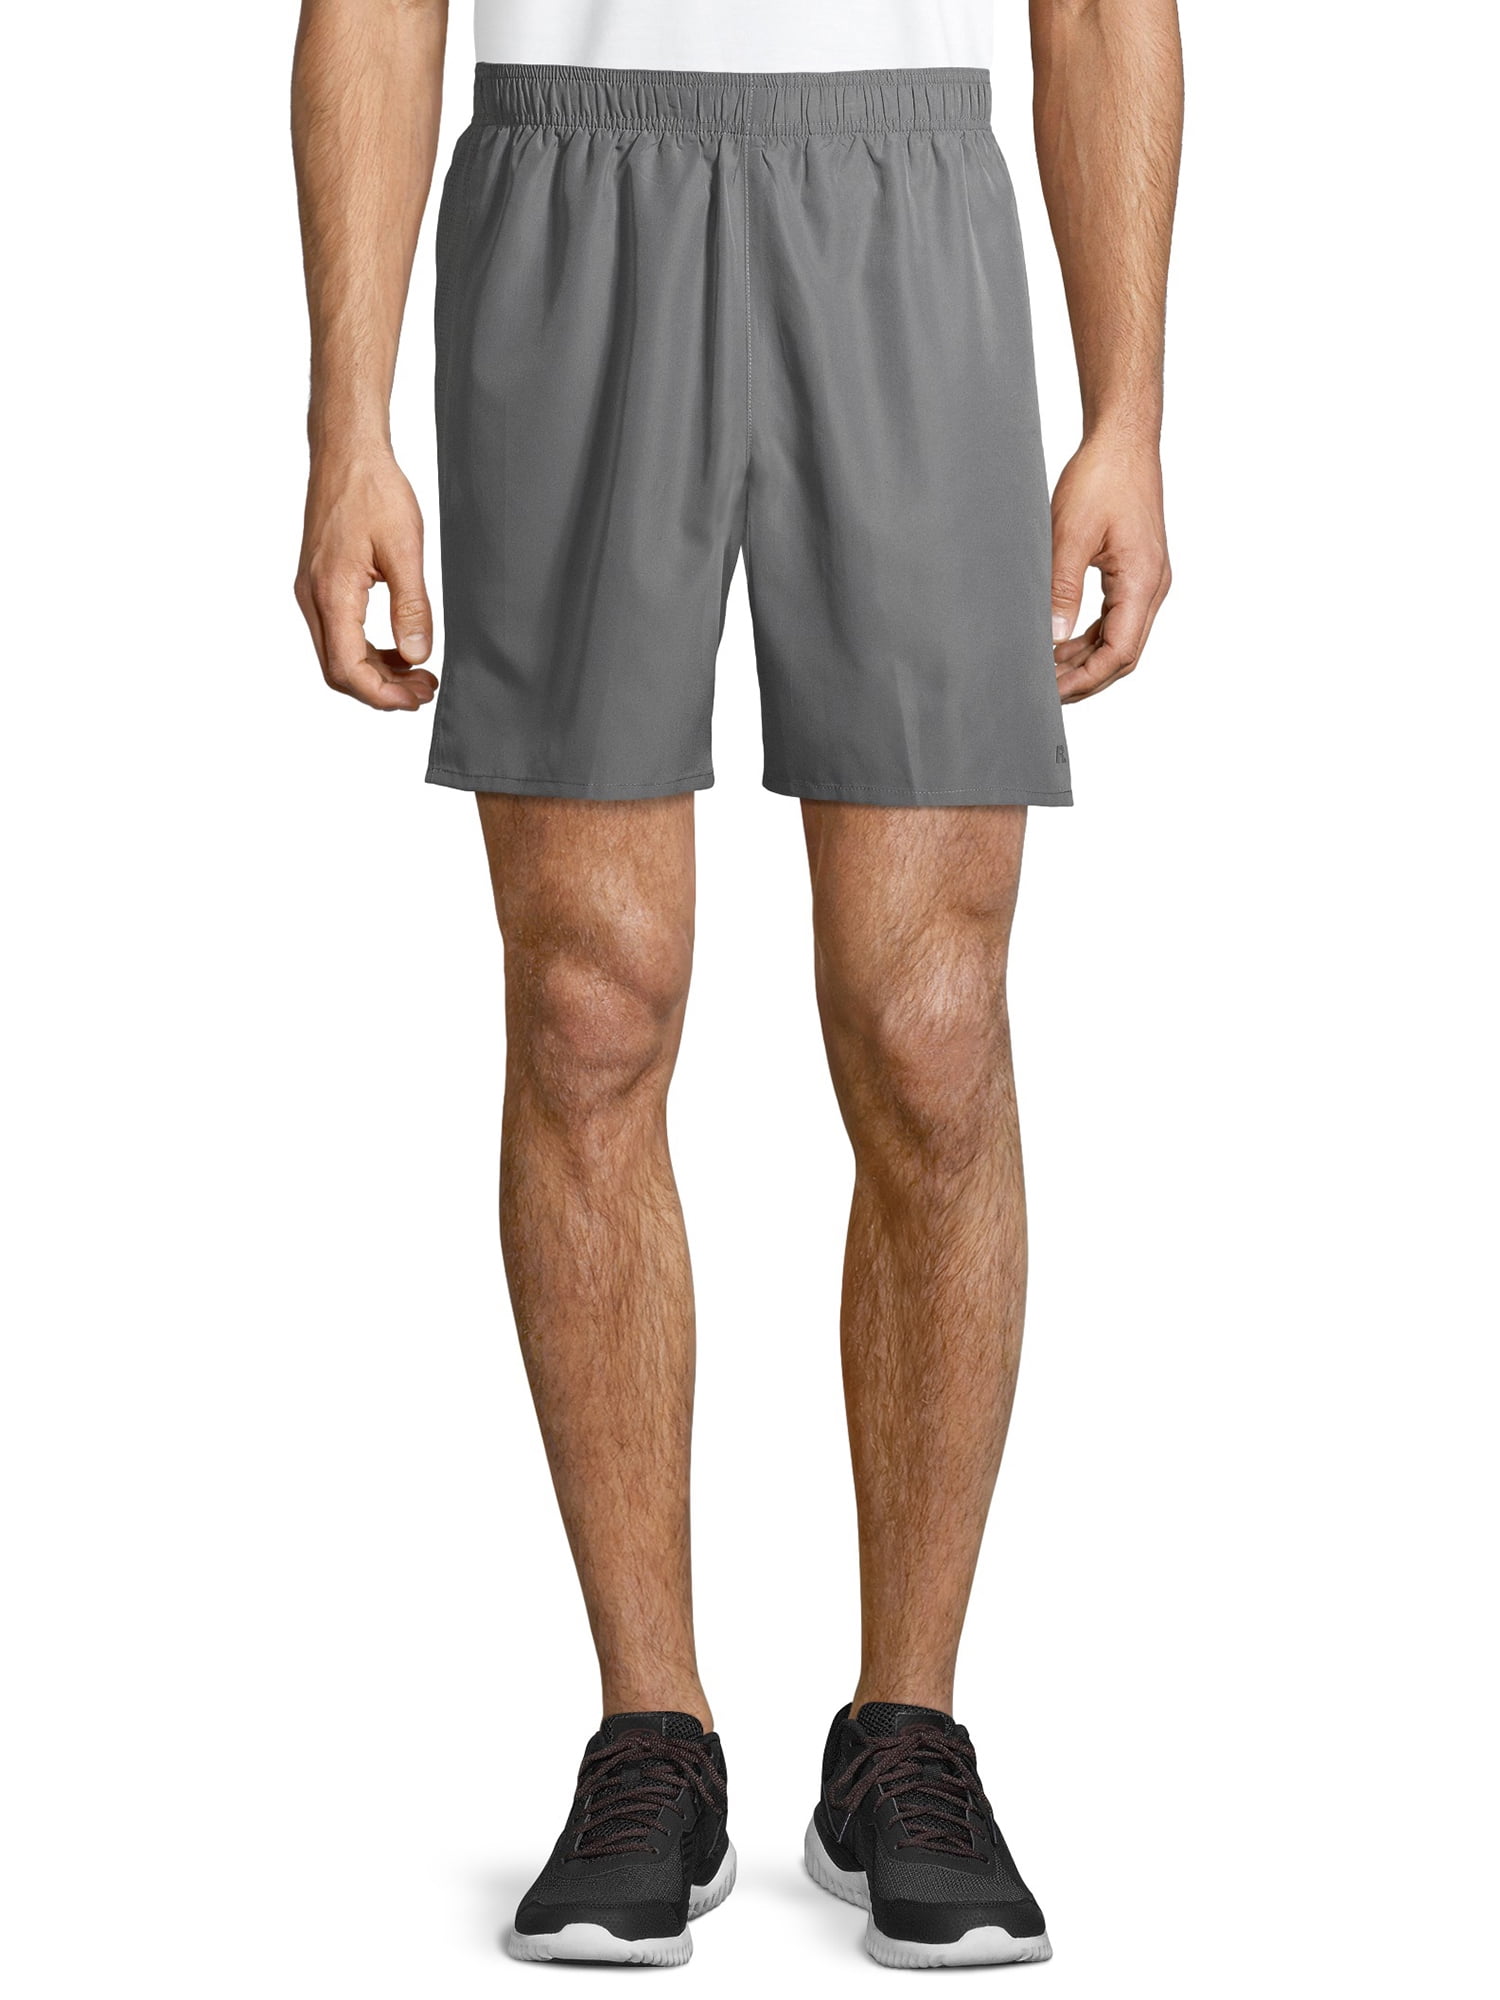 smukke Menda City brysomme Russell Men's and Big Men's Active 7" Ombre Shorts, up to 2XL - Walmart.com